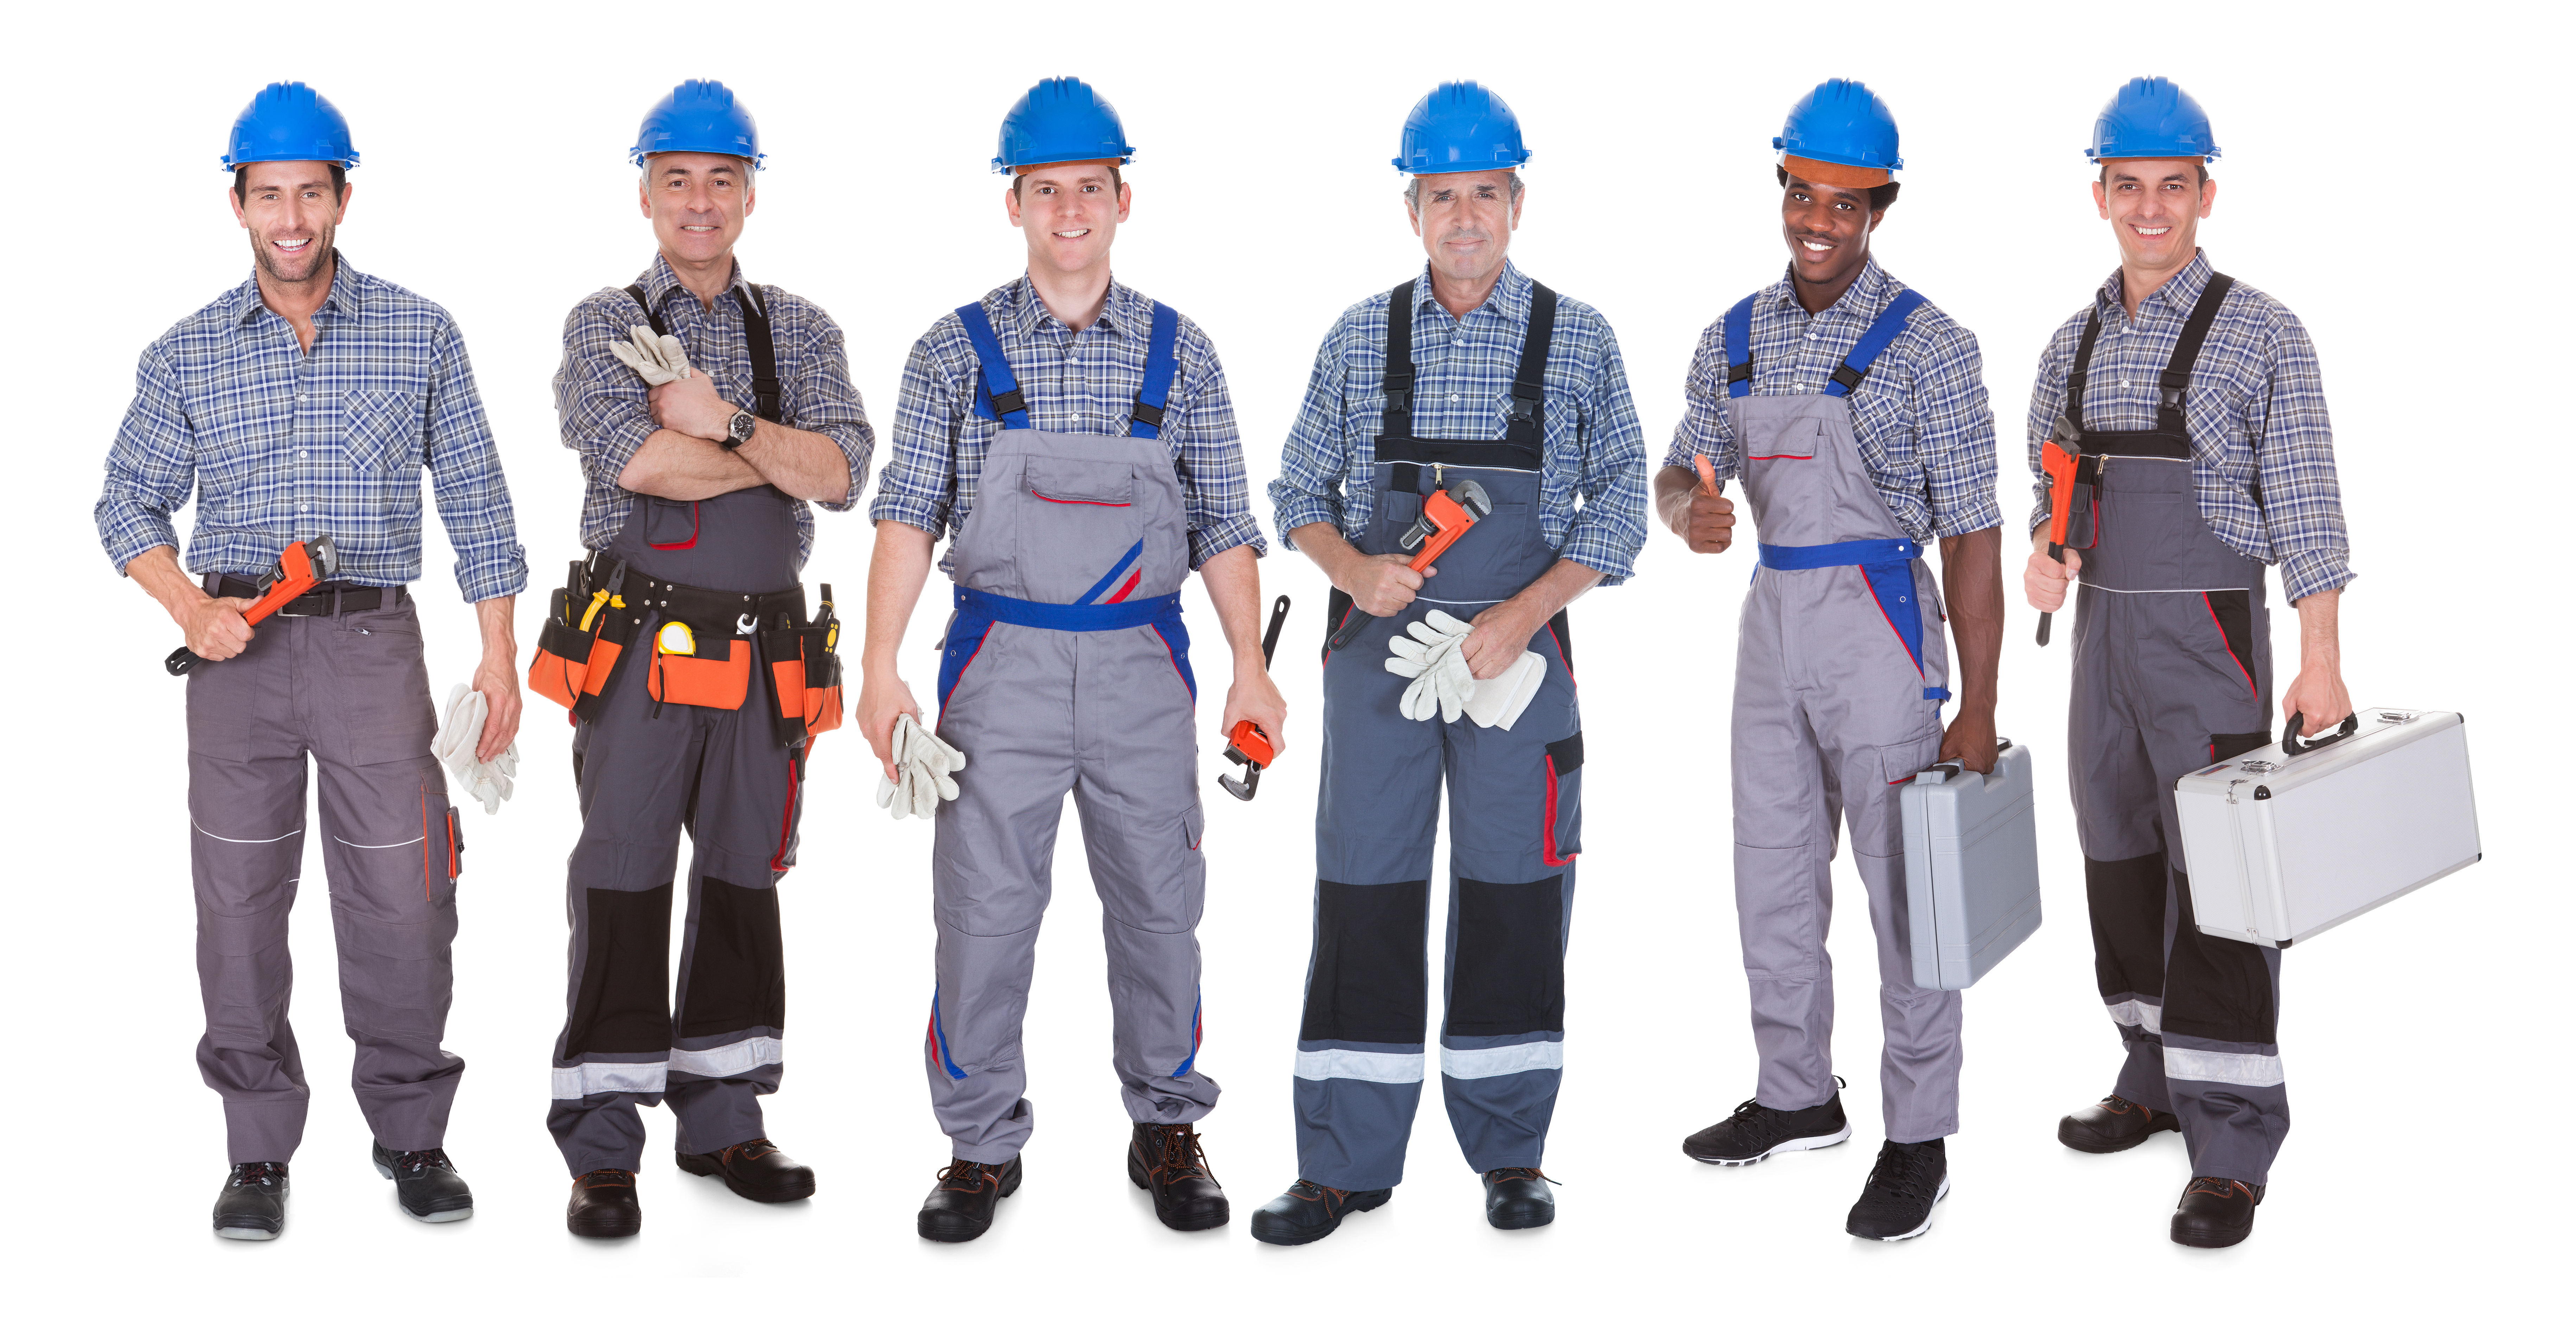 Group Of Plumber With Tools